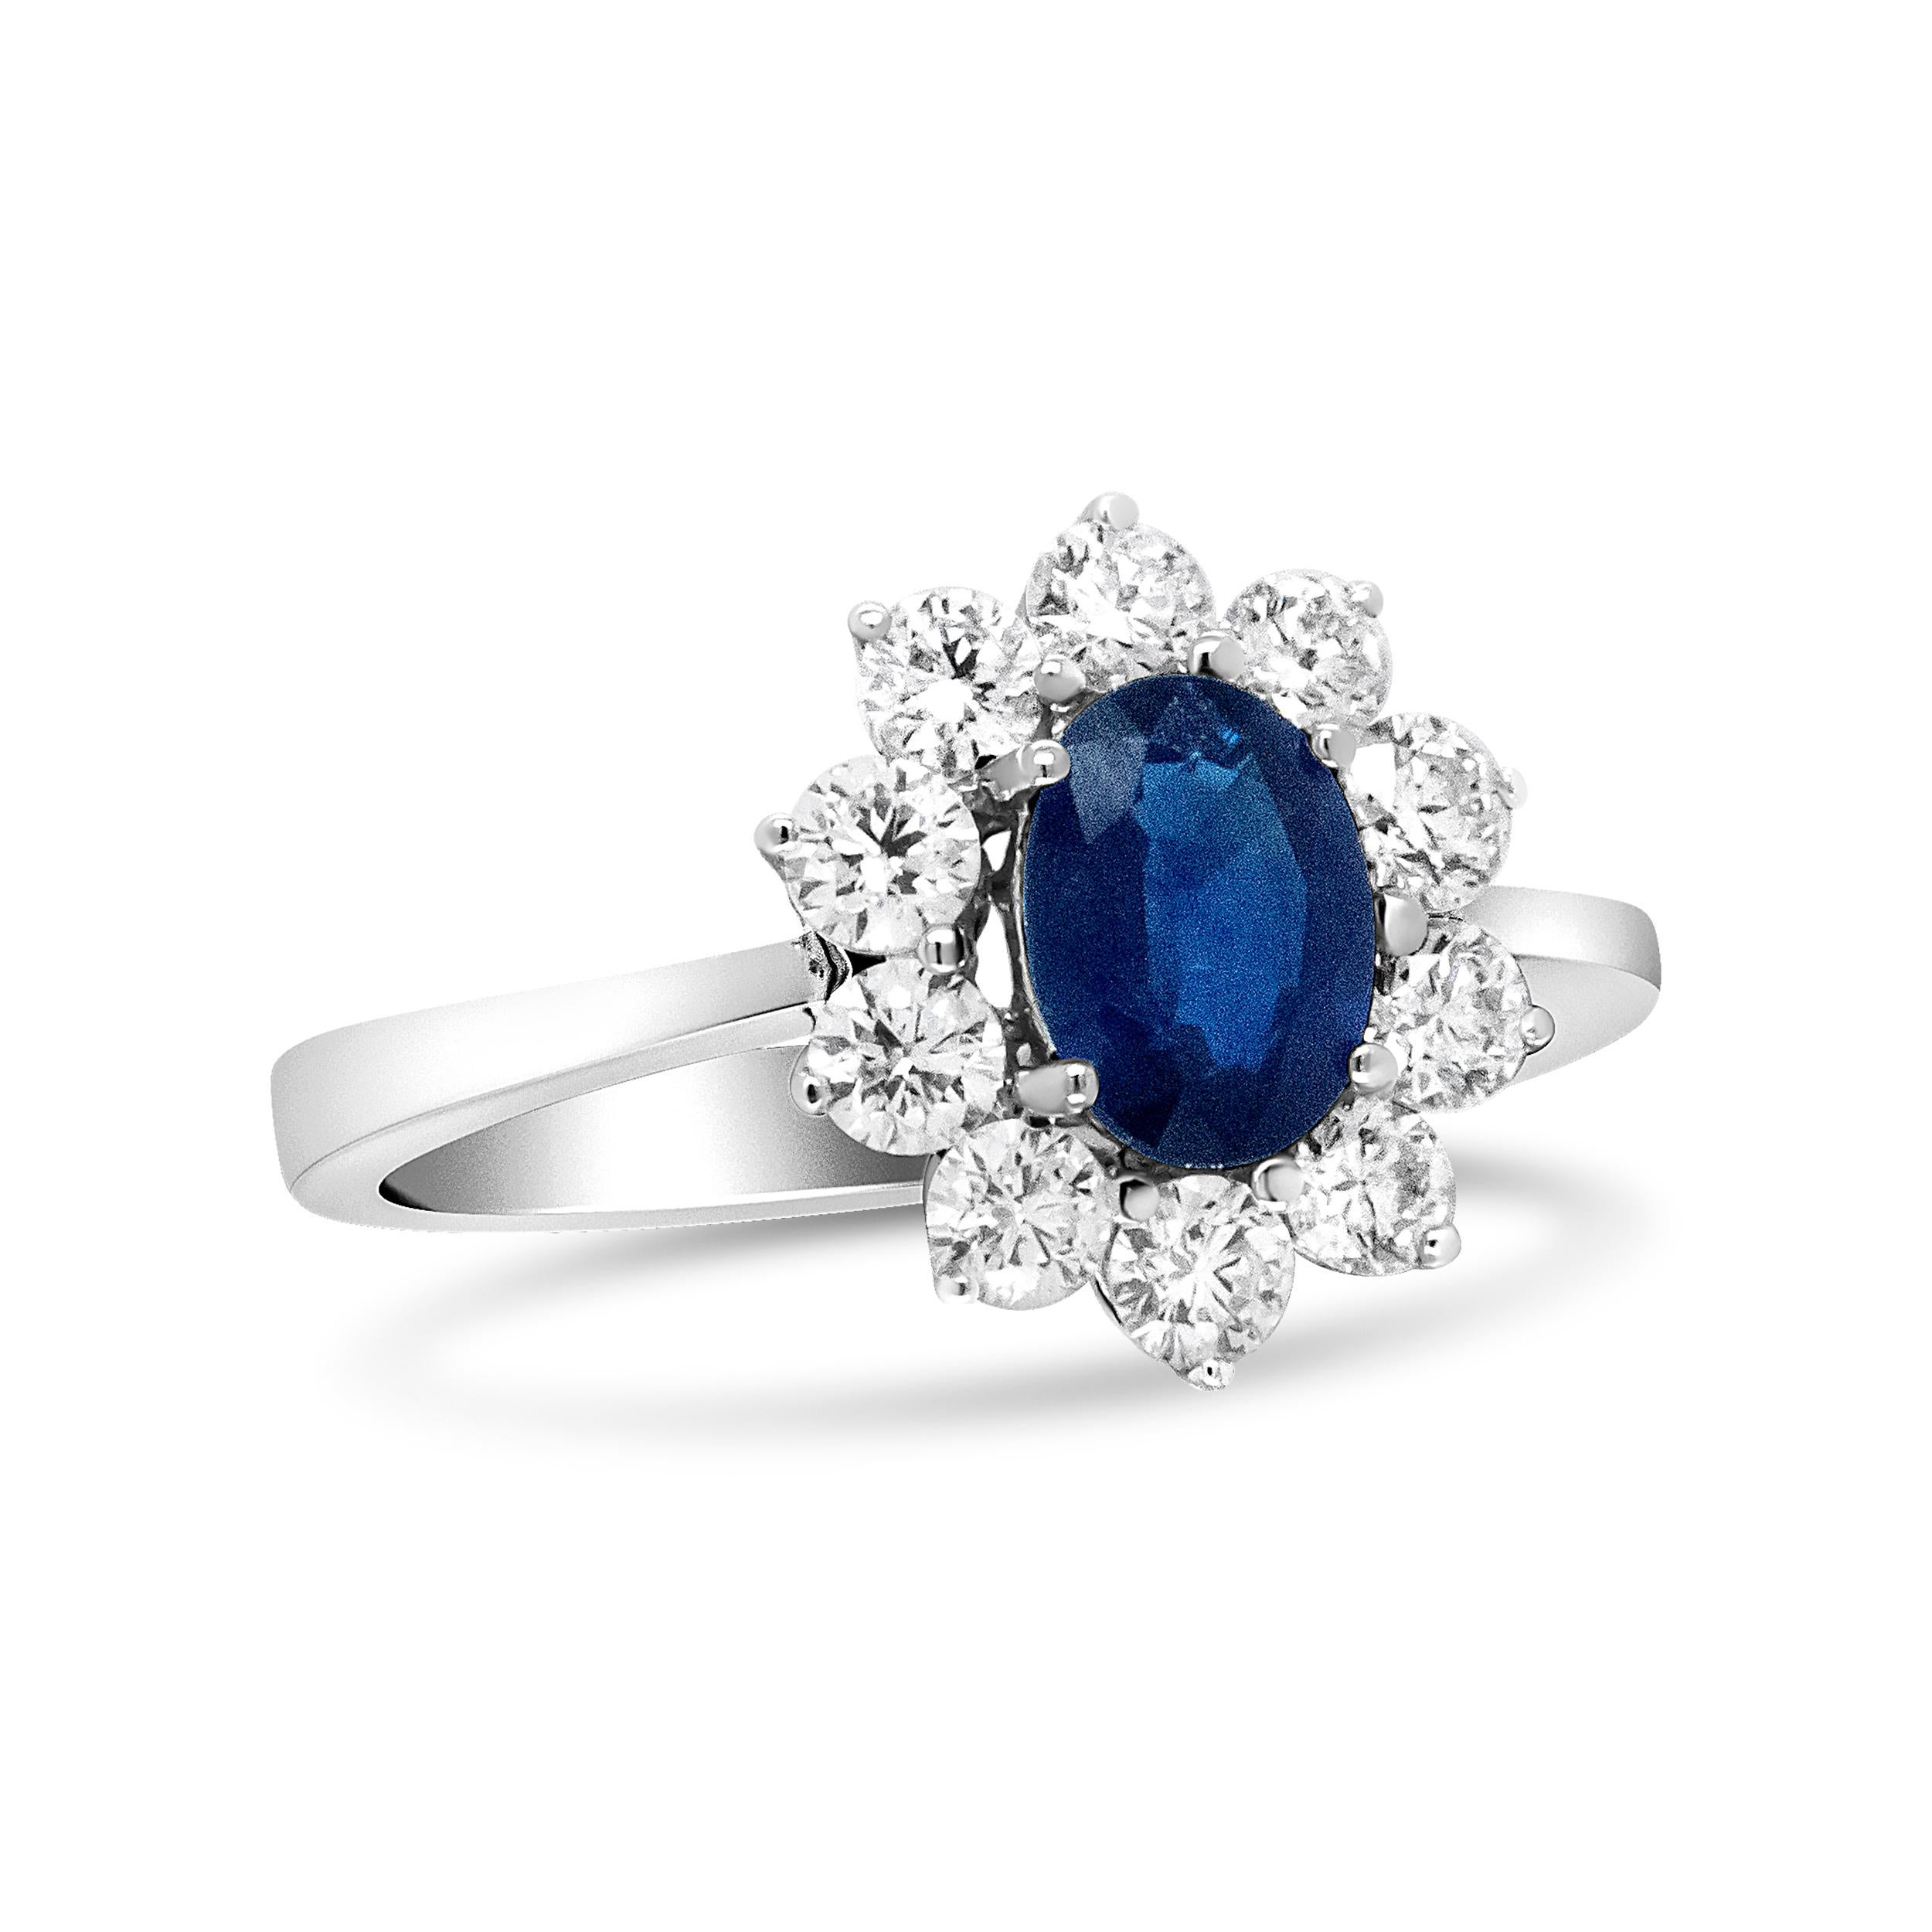 A ring that mirrors that of Diane's, this 18k white gold is beautifully set with a deep blue sapphire gemstone at its center. This 7x5mm stone is flanked by a floral cluster of natural white, round-cut diamonds all along the sides. The total carat